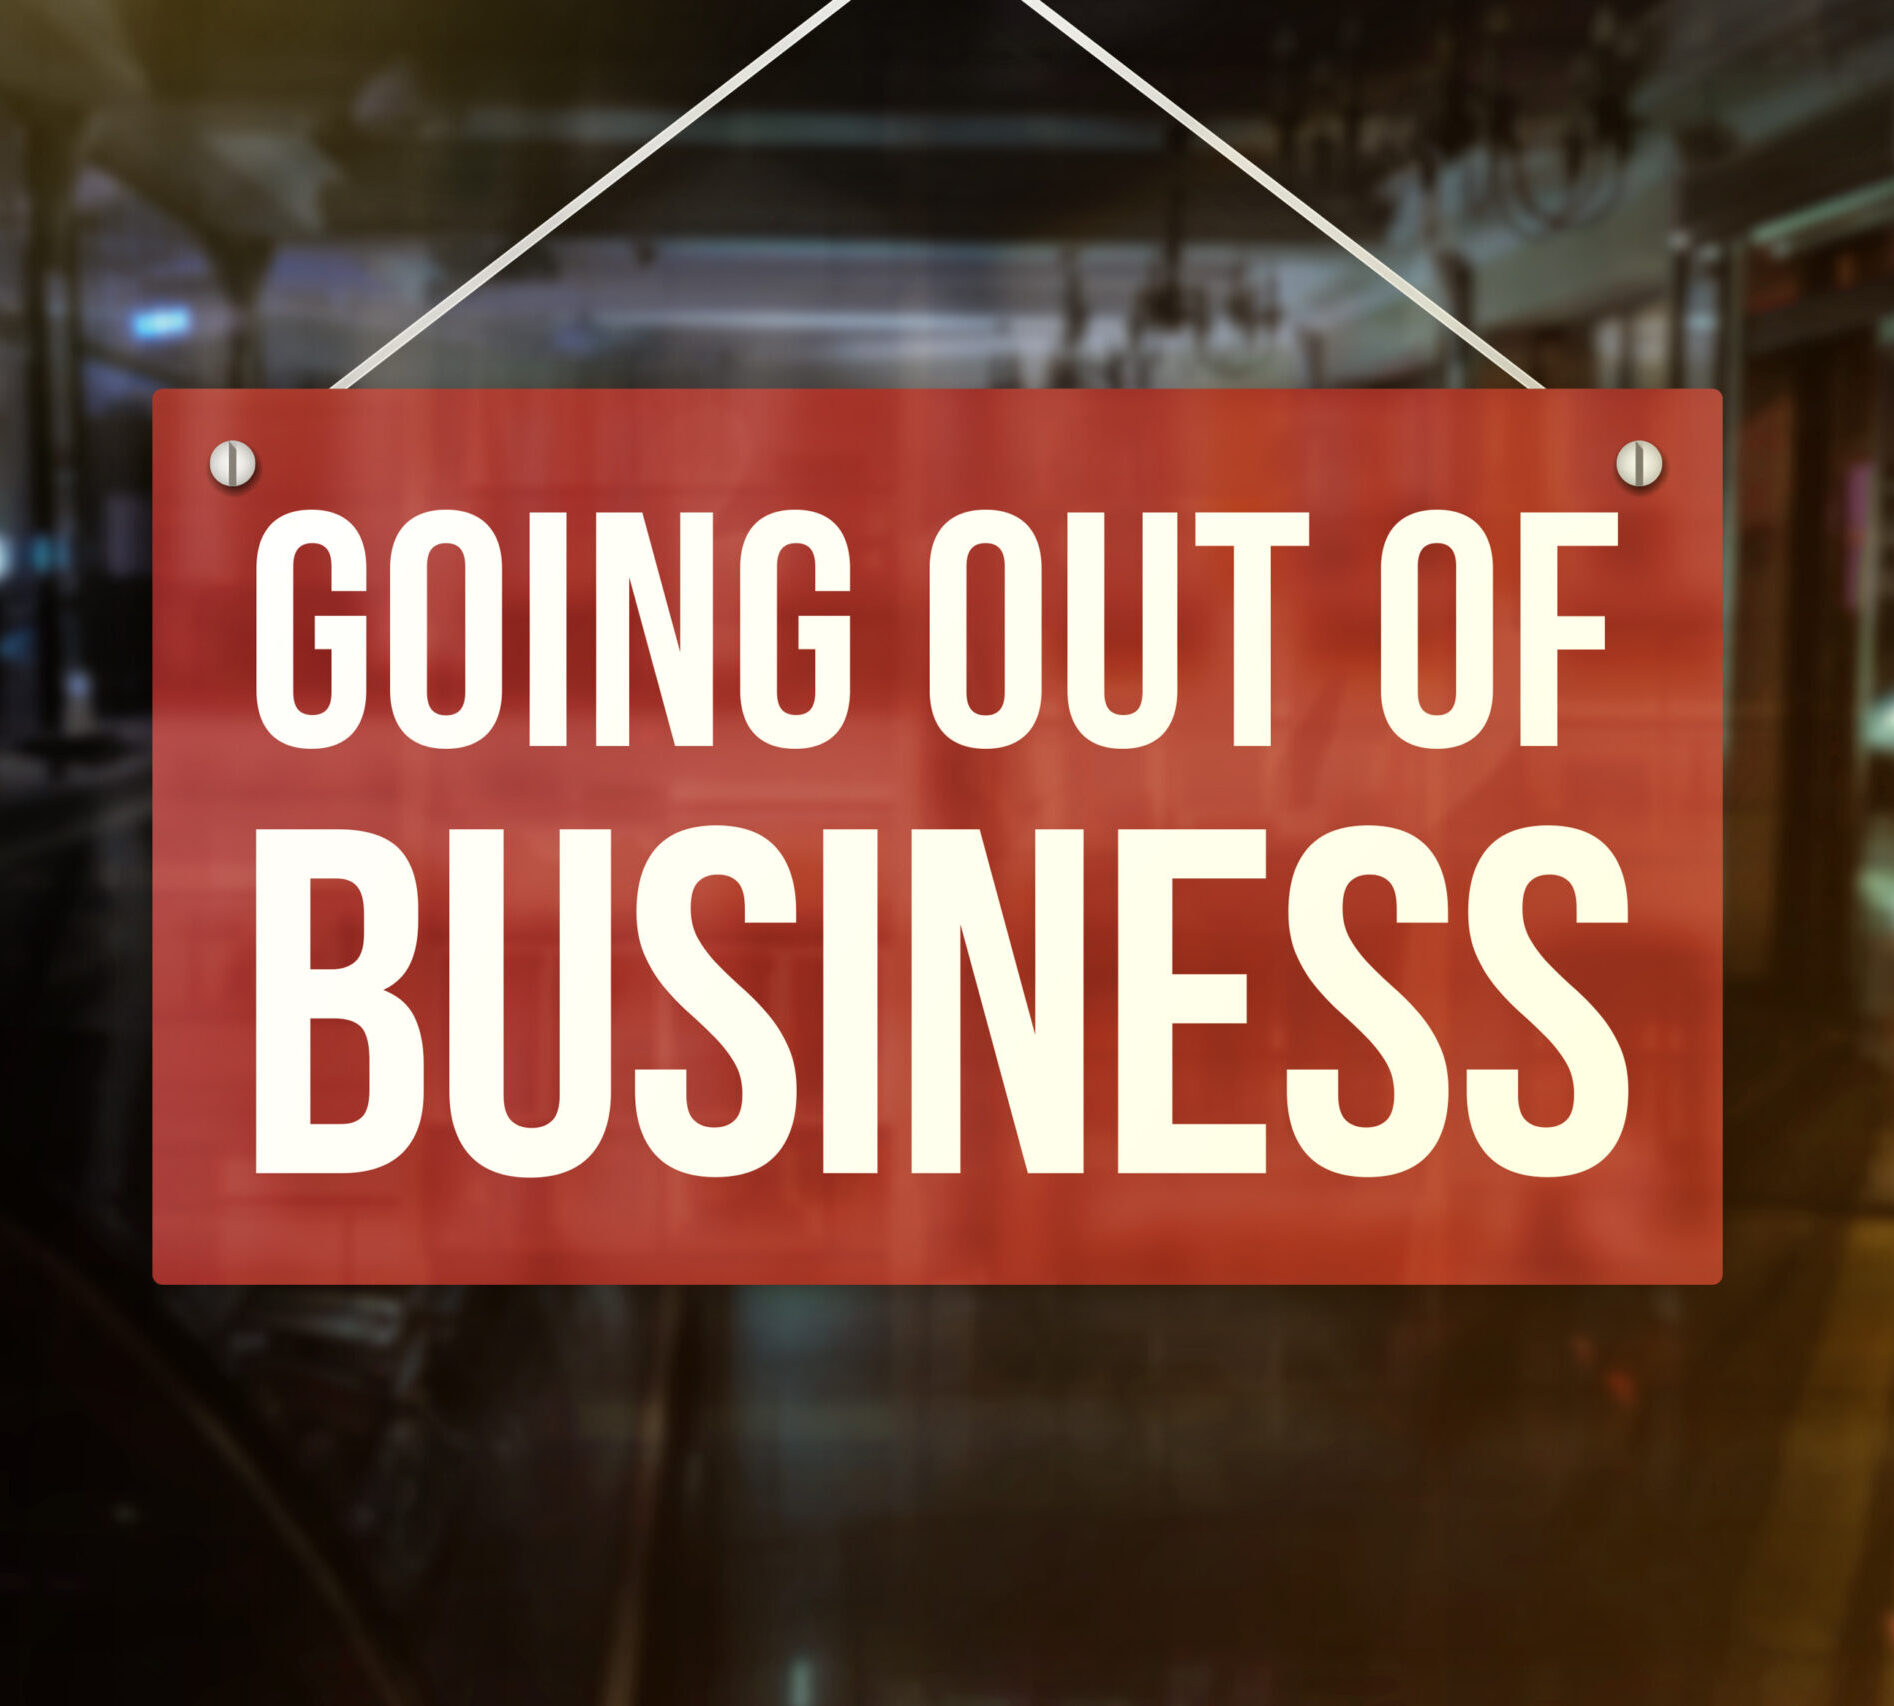 "Going out of business" sign in store window